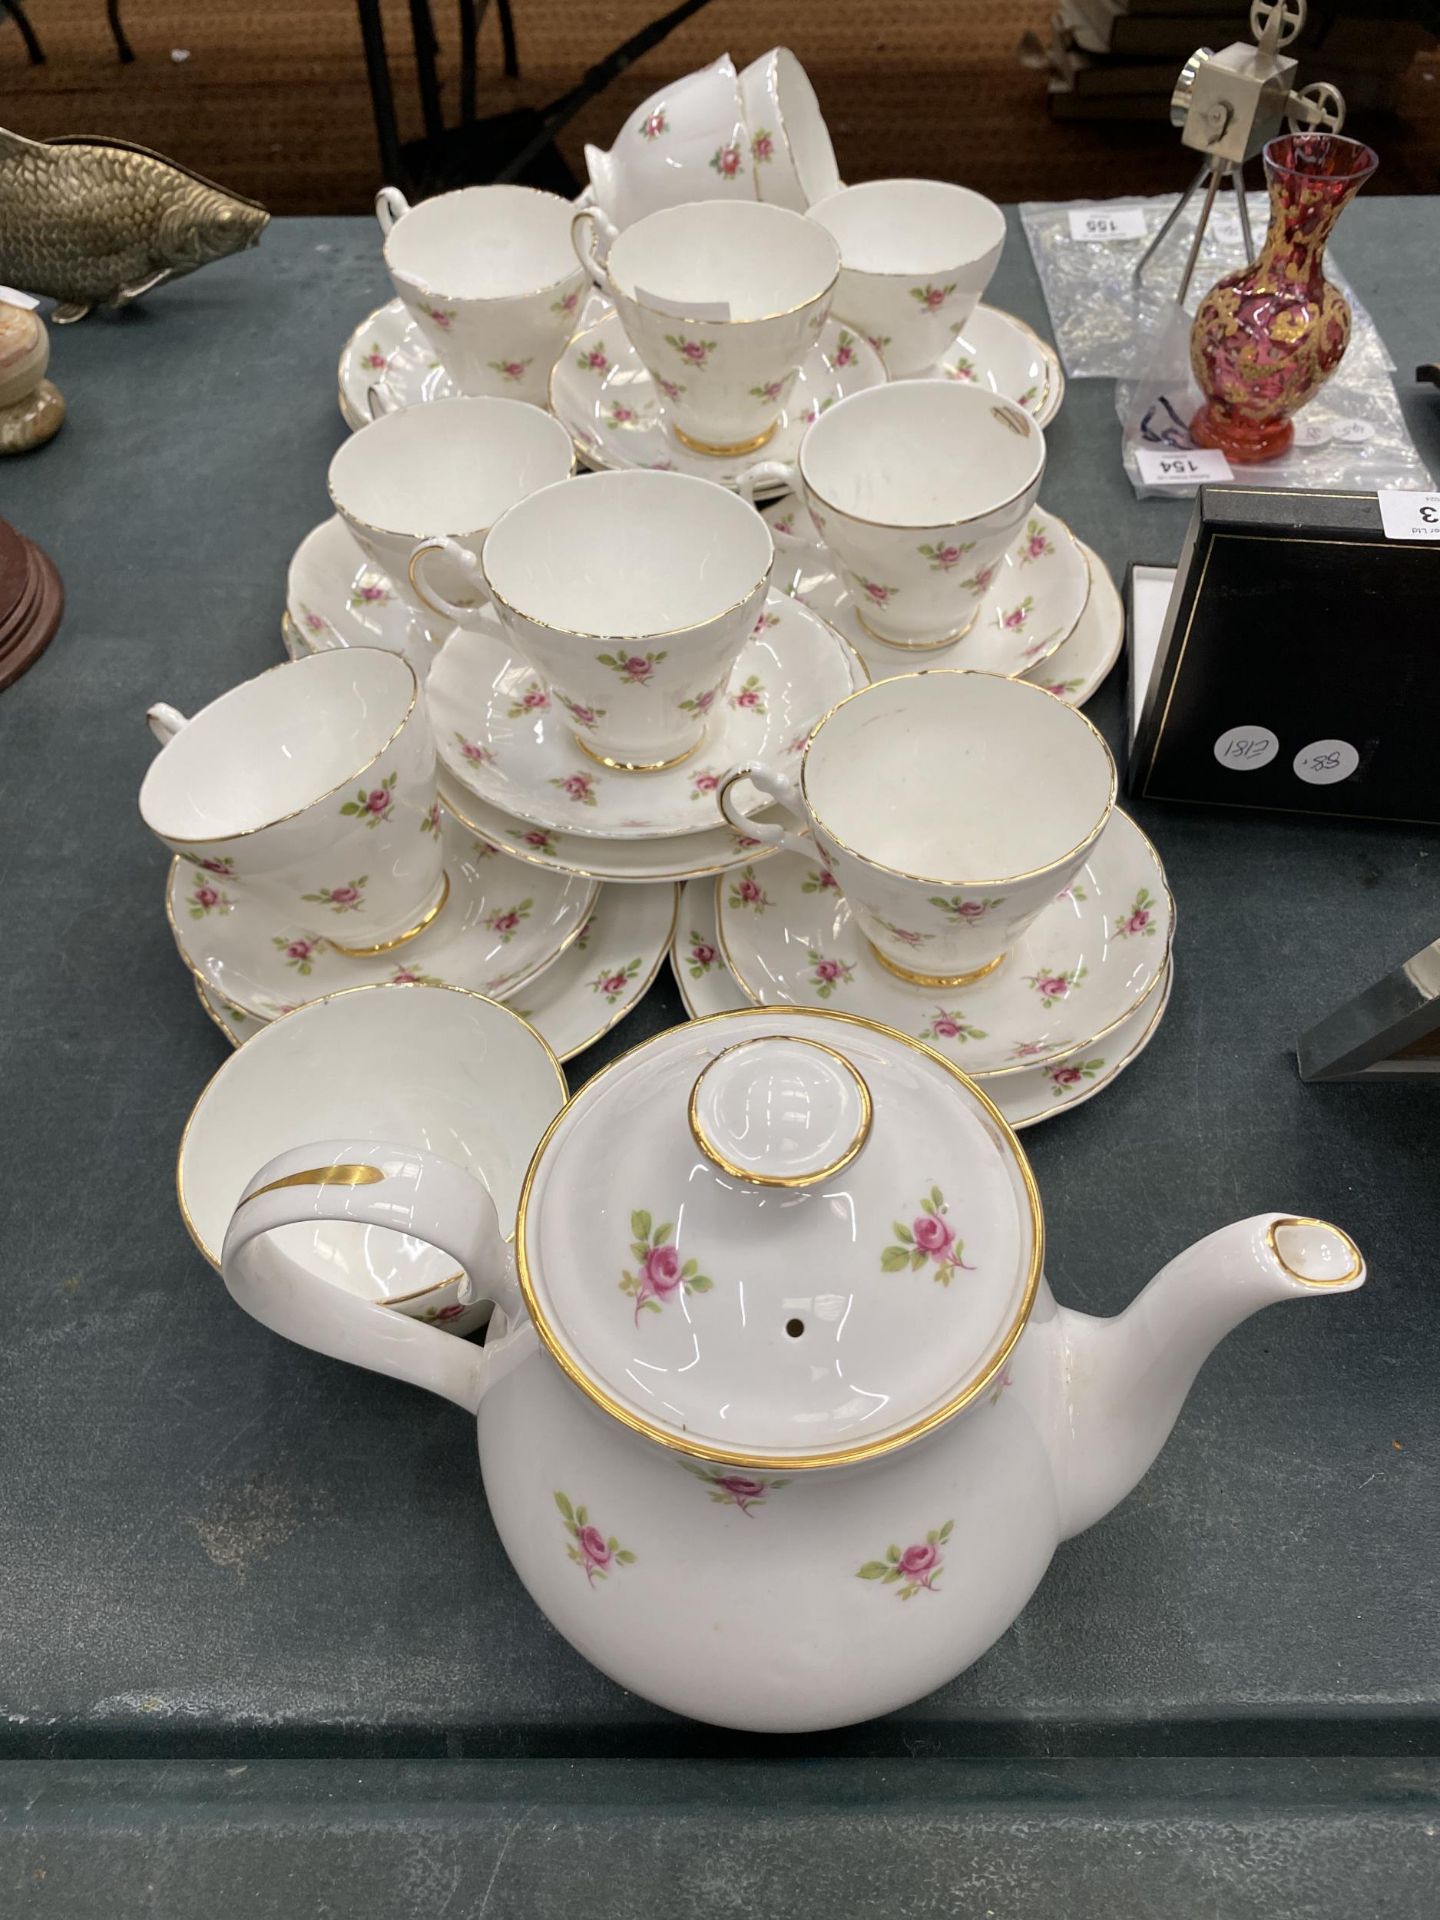 A VINTAGE ARGYLE TEASET TO INCLUDE A TEAPOT, SUGAR BOWL, CUPS, SAUCERS AND SIDE PLATES - Image 5 of 5